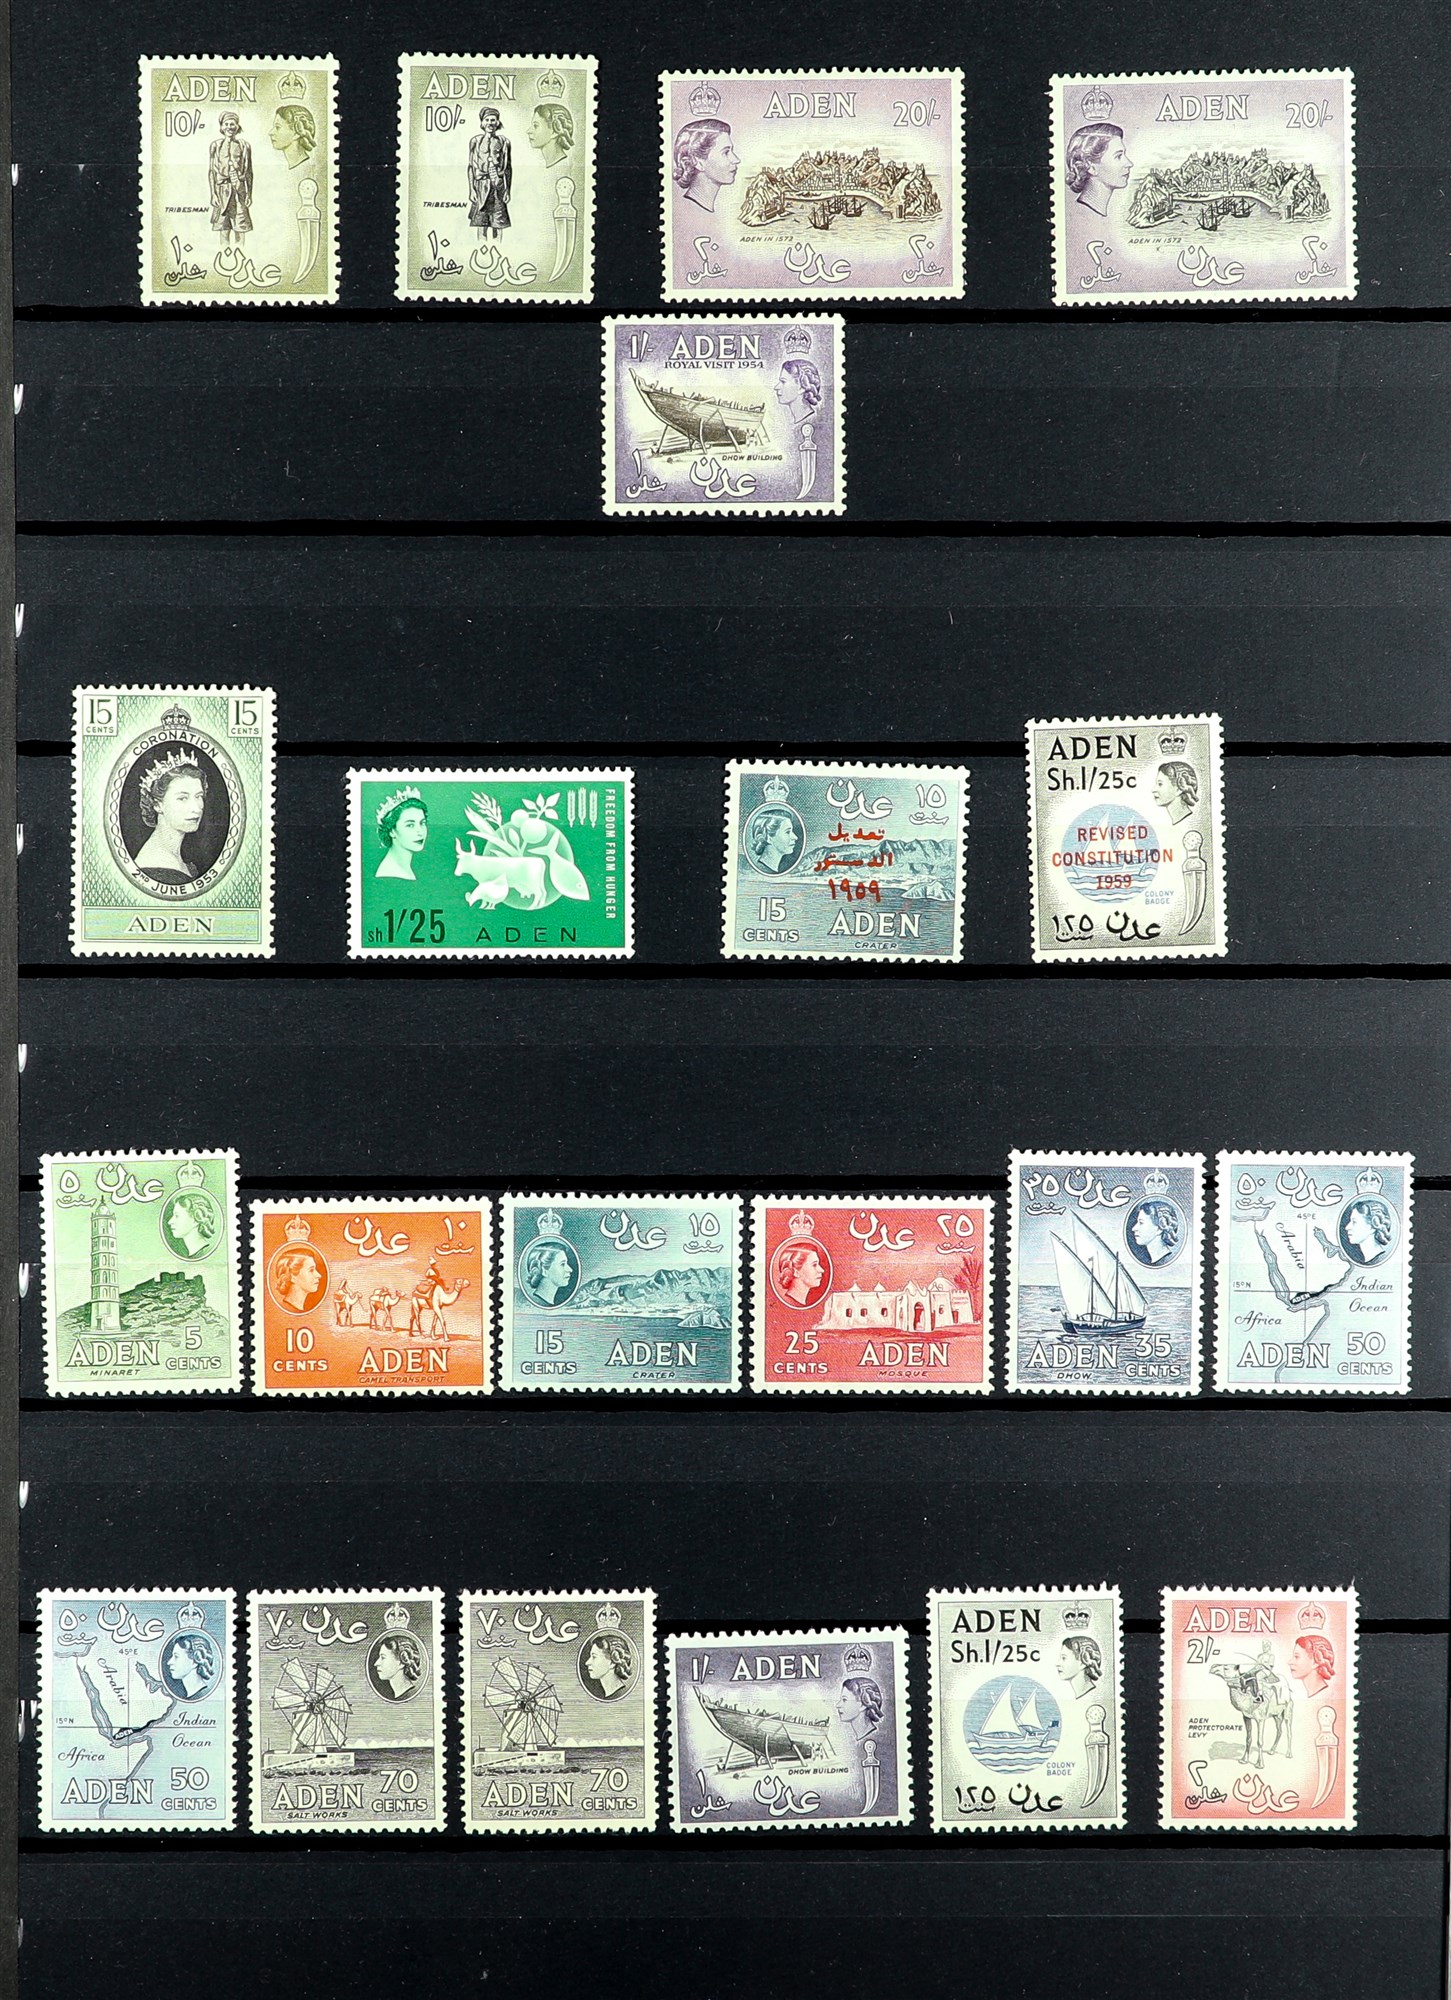 ADEN 1953 - 1965 NEVER HINGED MINT COLLECTION near- complete including extra perfs & shades, a - Image 2 of 2